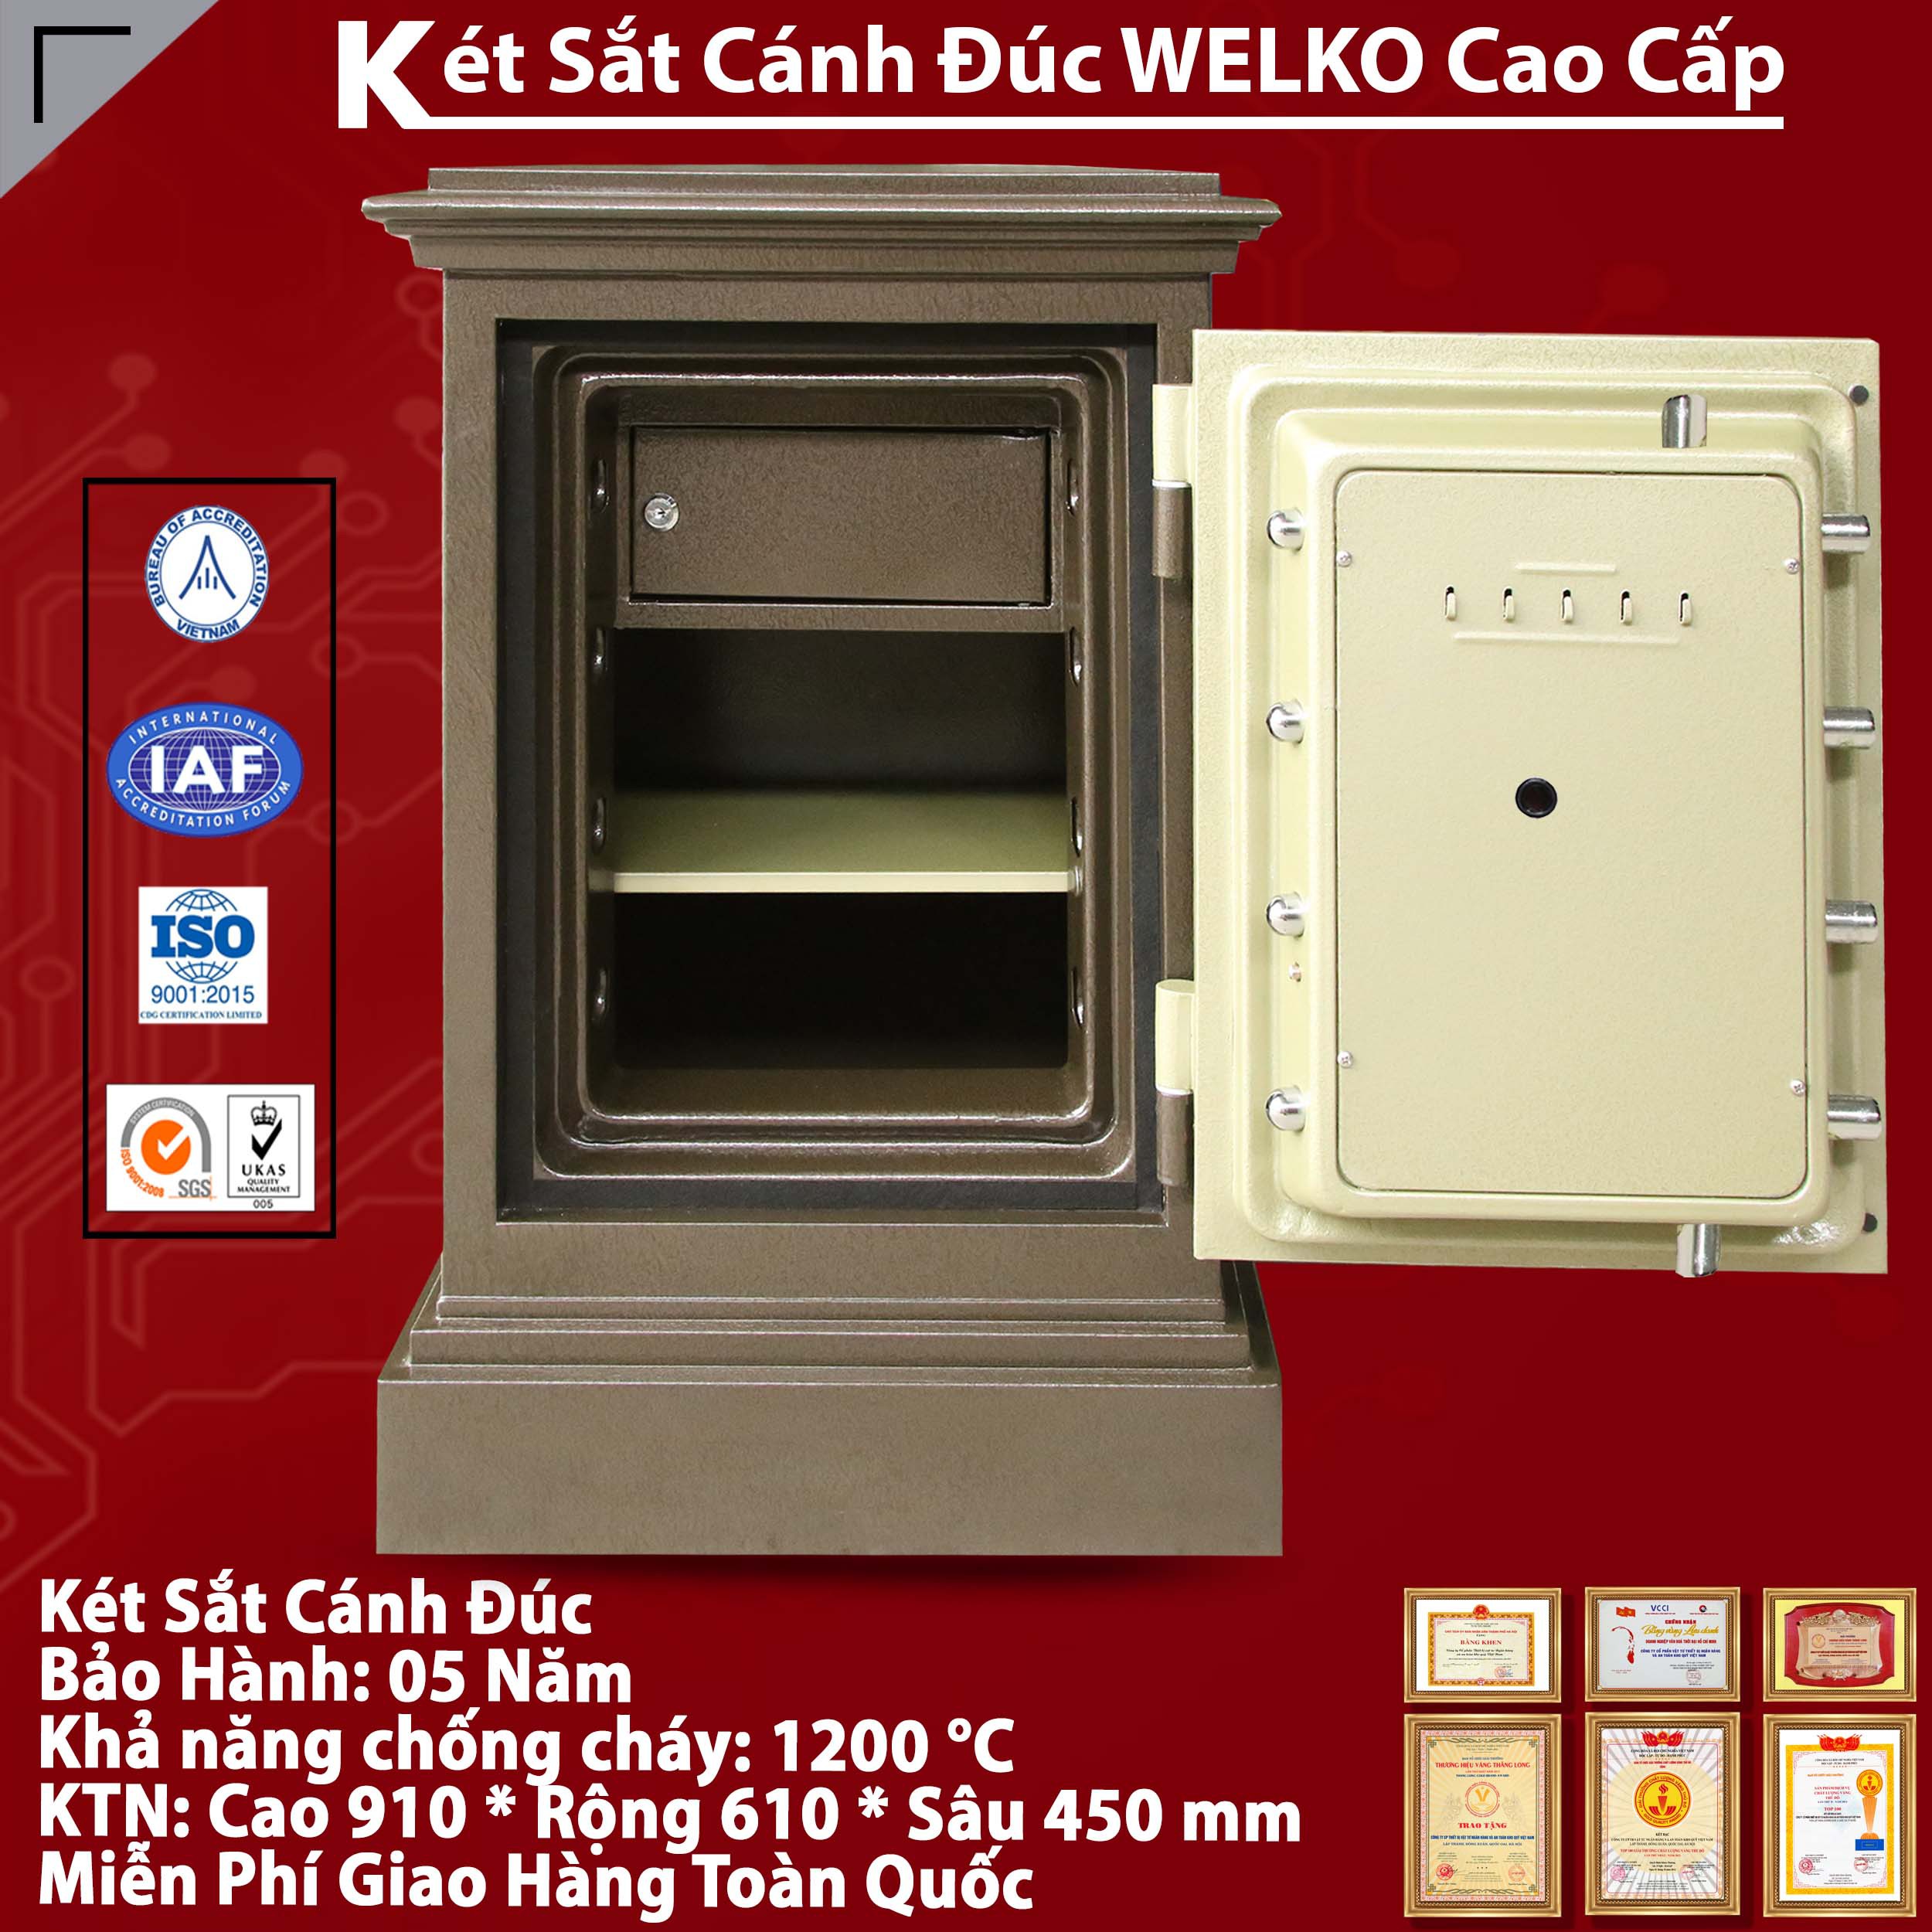 Ket Sat Canh Duc WELKO Chat Luong Cao